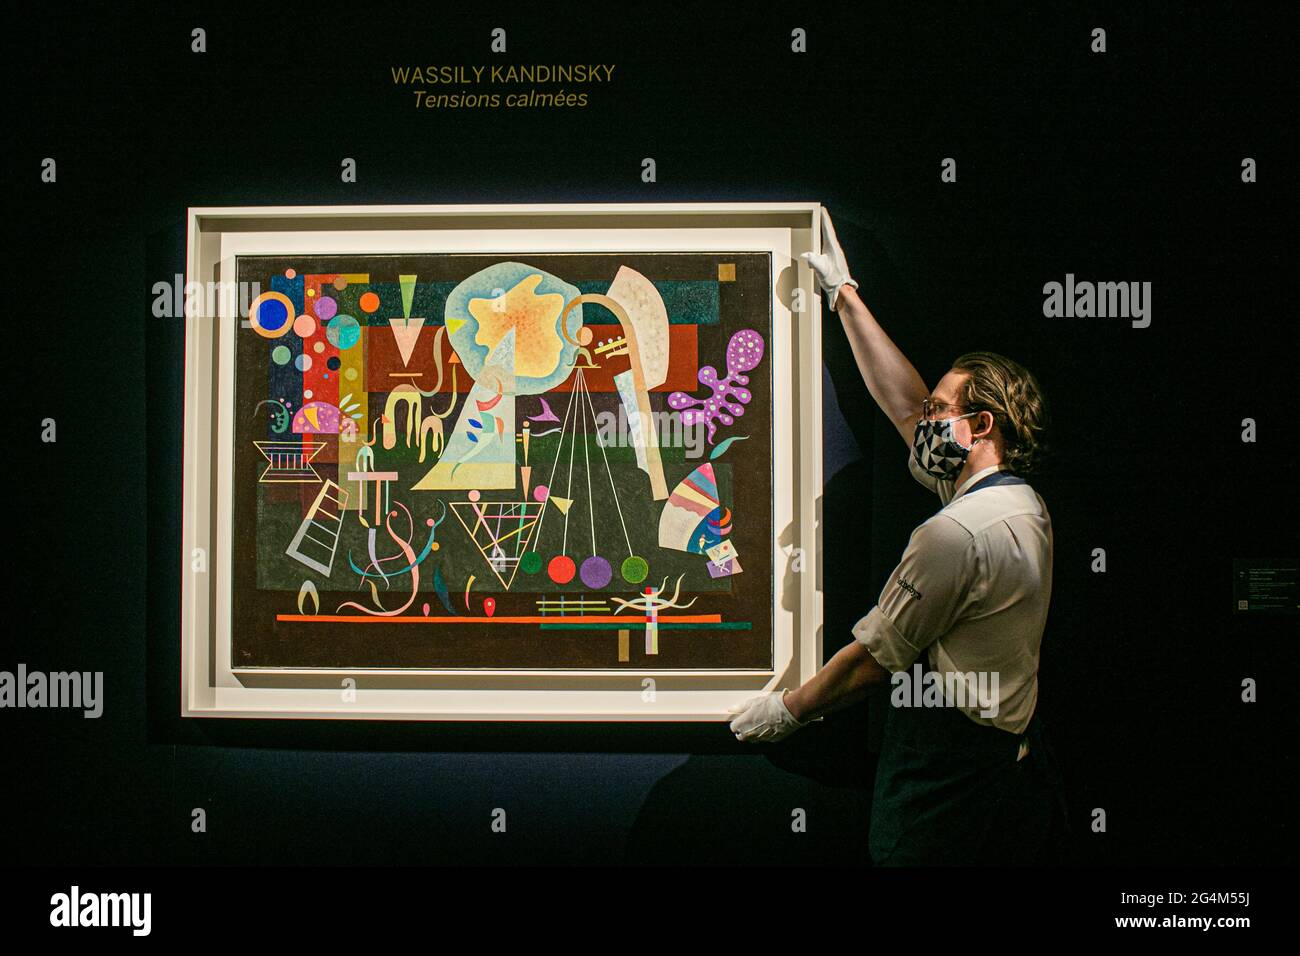 LONDON 22 June 2021. WASSILY KANDINSKY , Tensions calmées, 1937,(Estimate: £18-25million. Sotheby's Modern & Contemporary Art Sale preview as part of the major summer auctions. The sale will take place on 29 June. Credit amer ghazzal/Alamy Live News Stock Photo